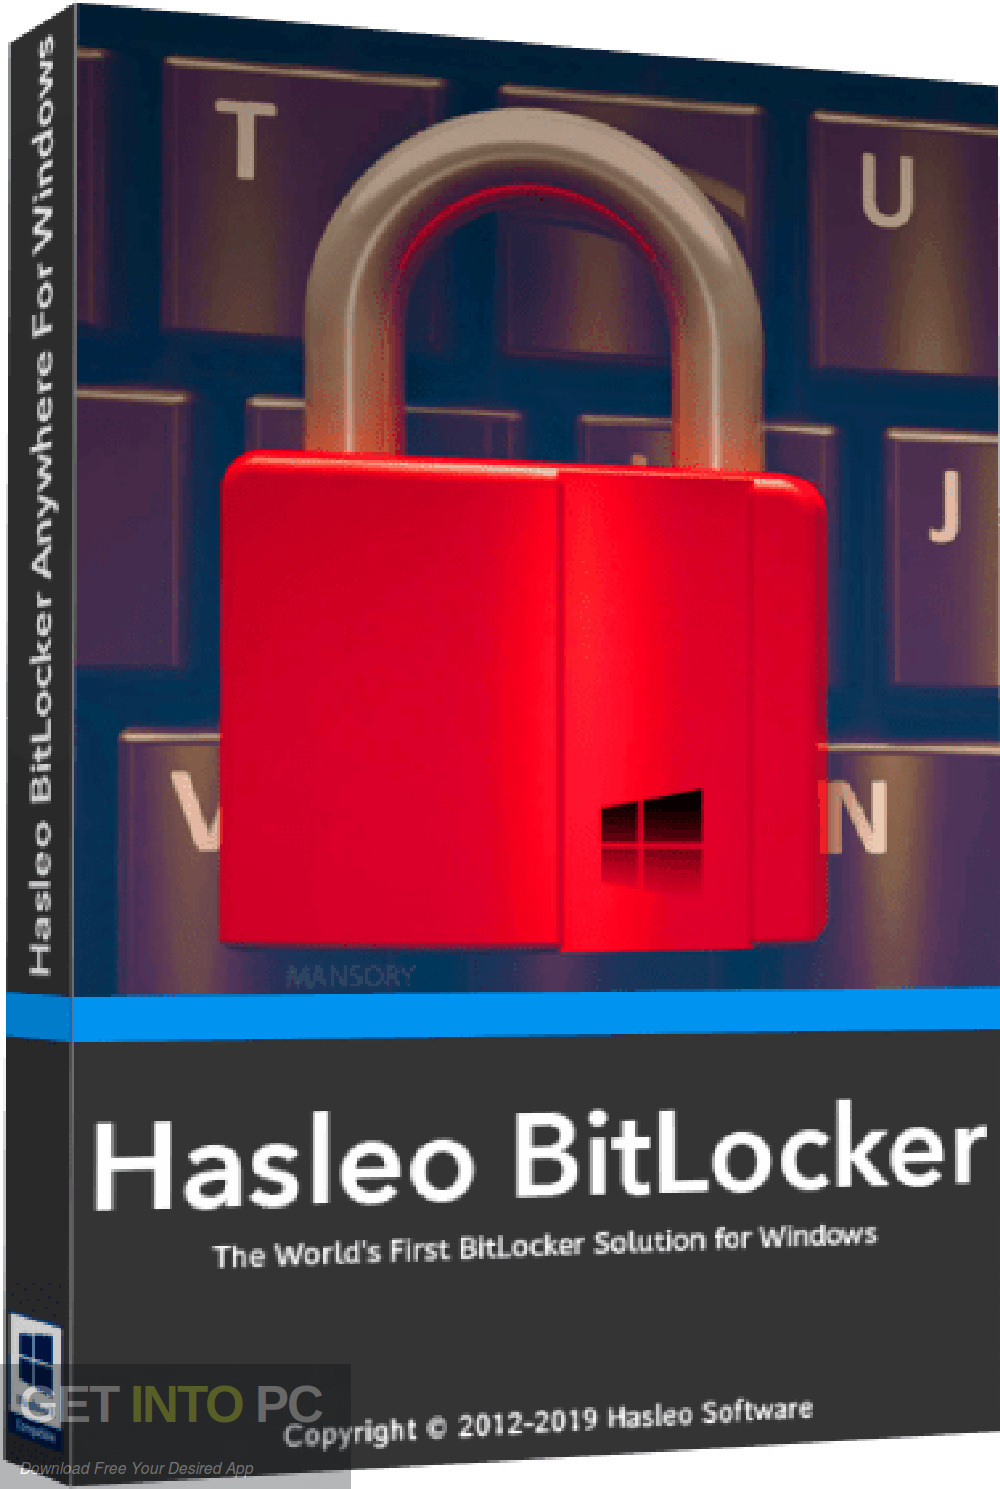 Hasleo BitLocker Anywhere Pro 9.3 instal the new version for mac